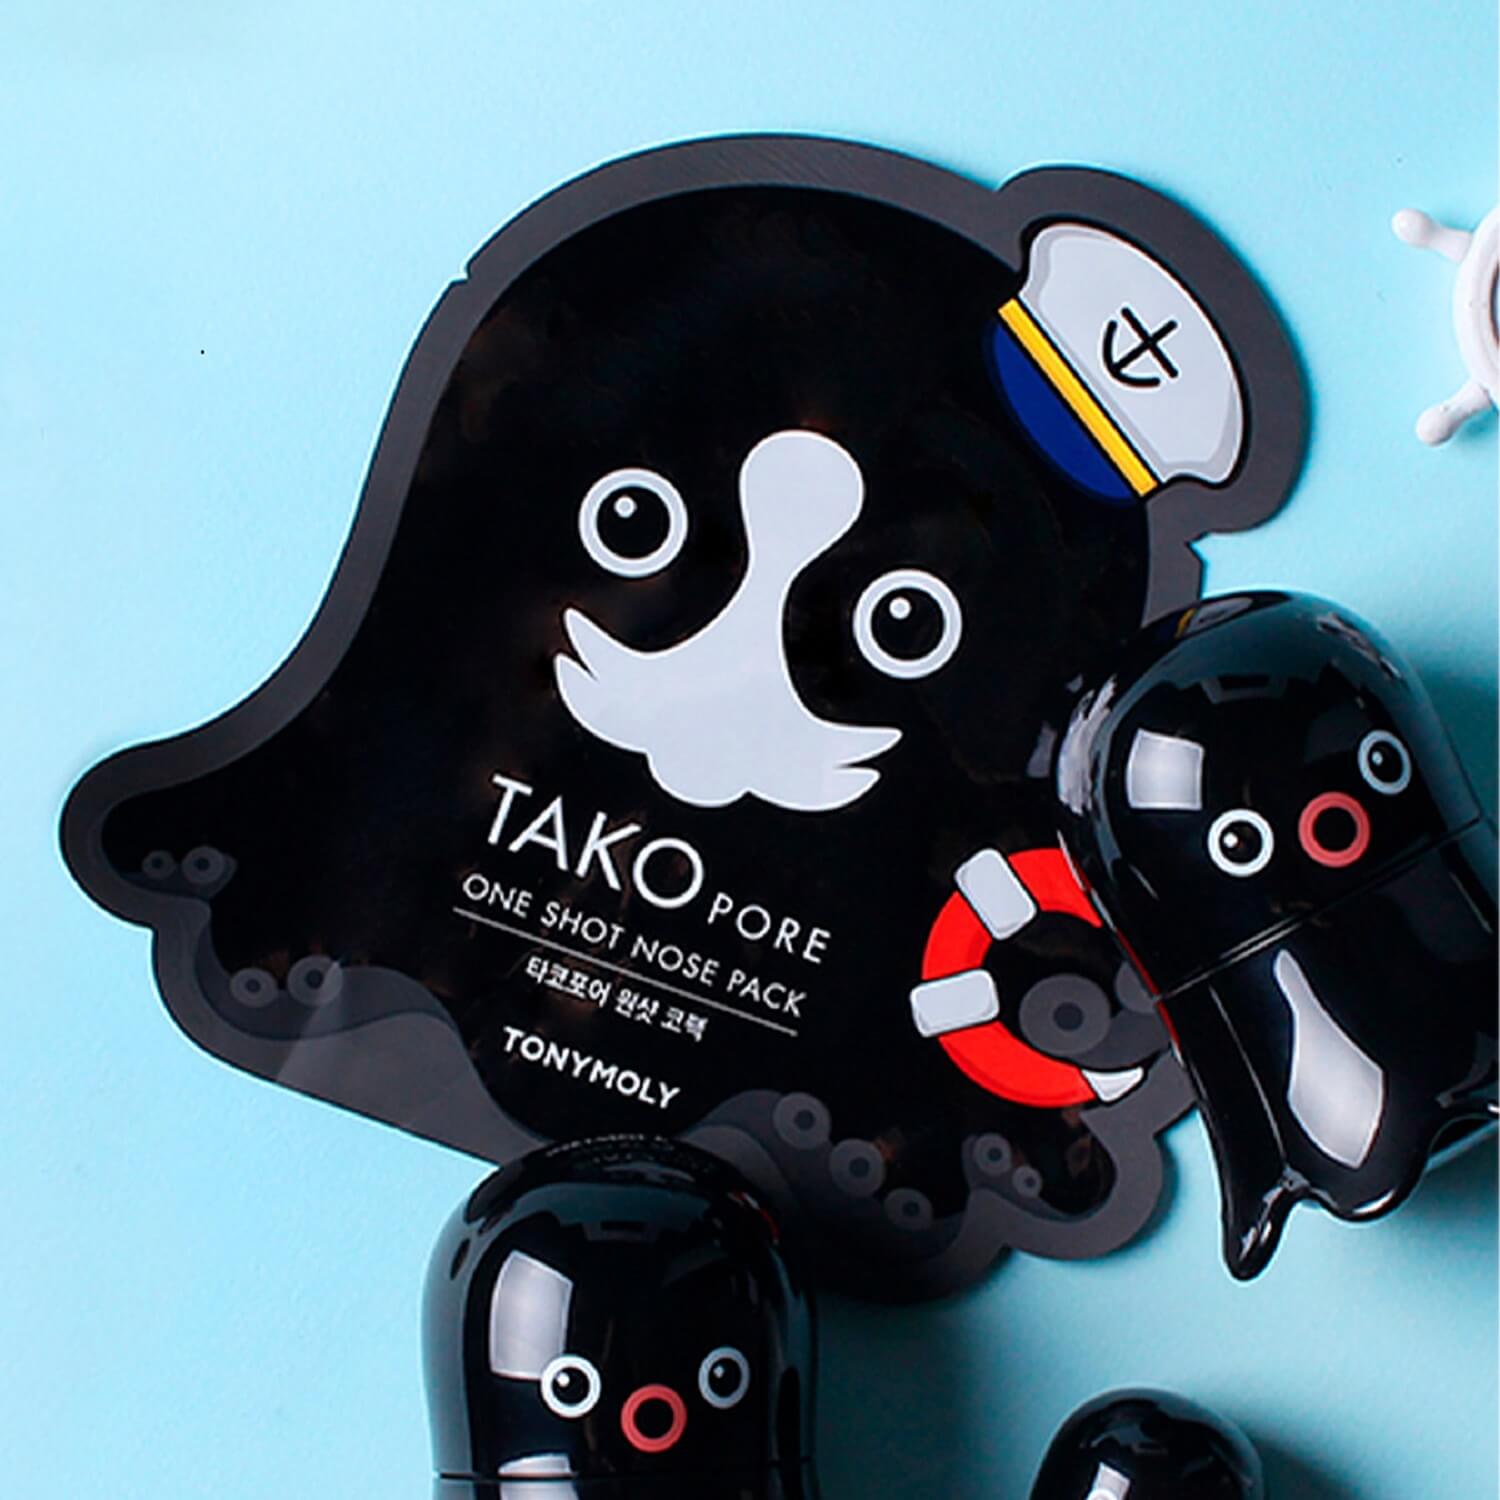 TAKOPORE ONE SHOT NOSE PACK